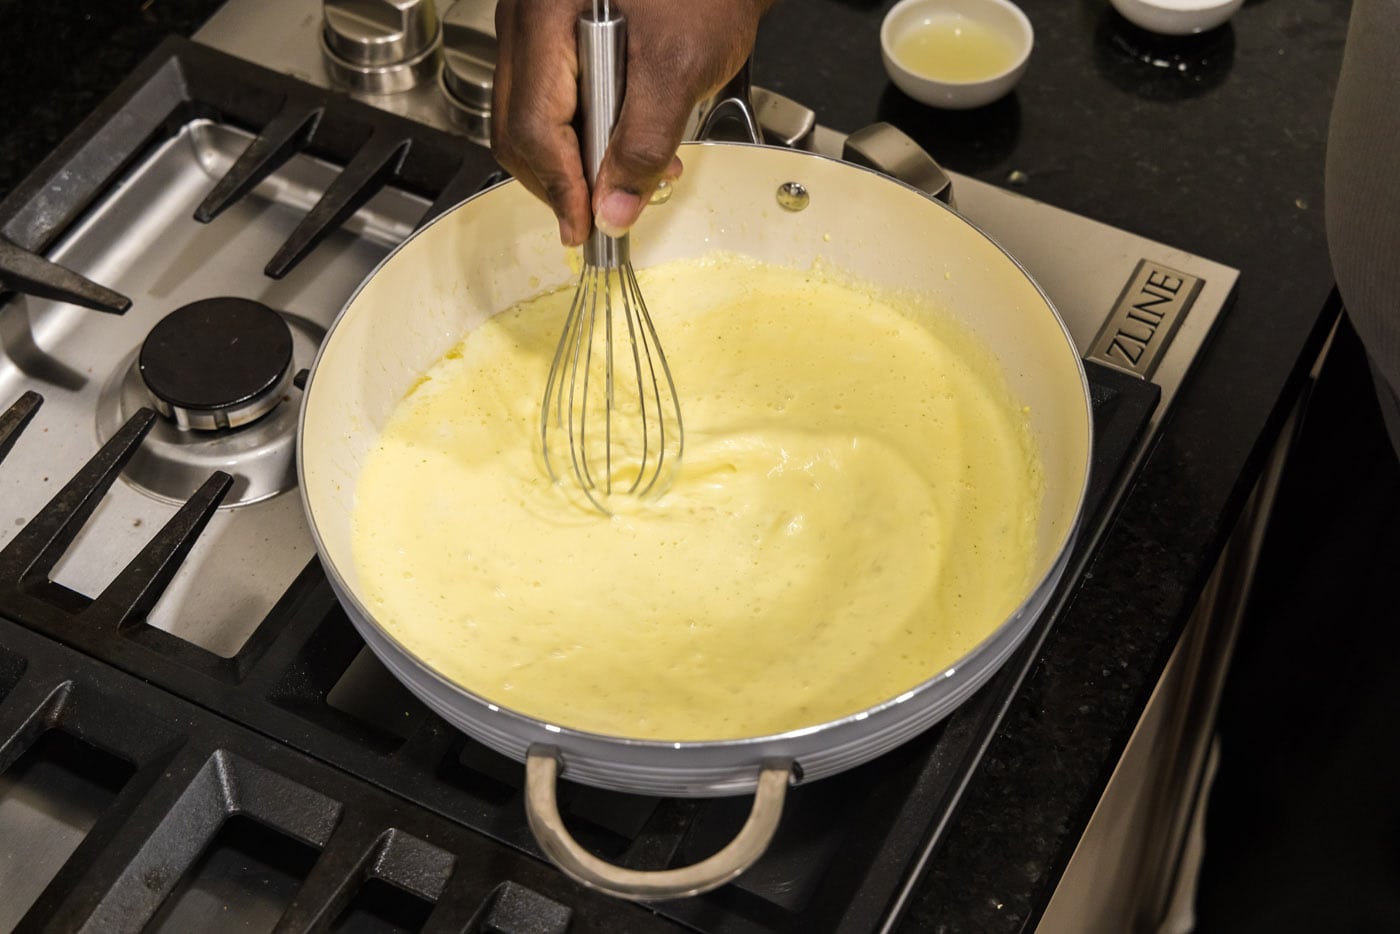 whisking egg mixture into cream in a hot skillet